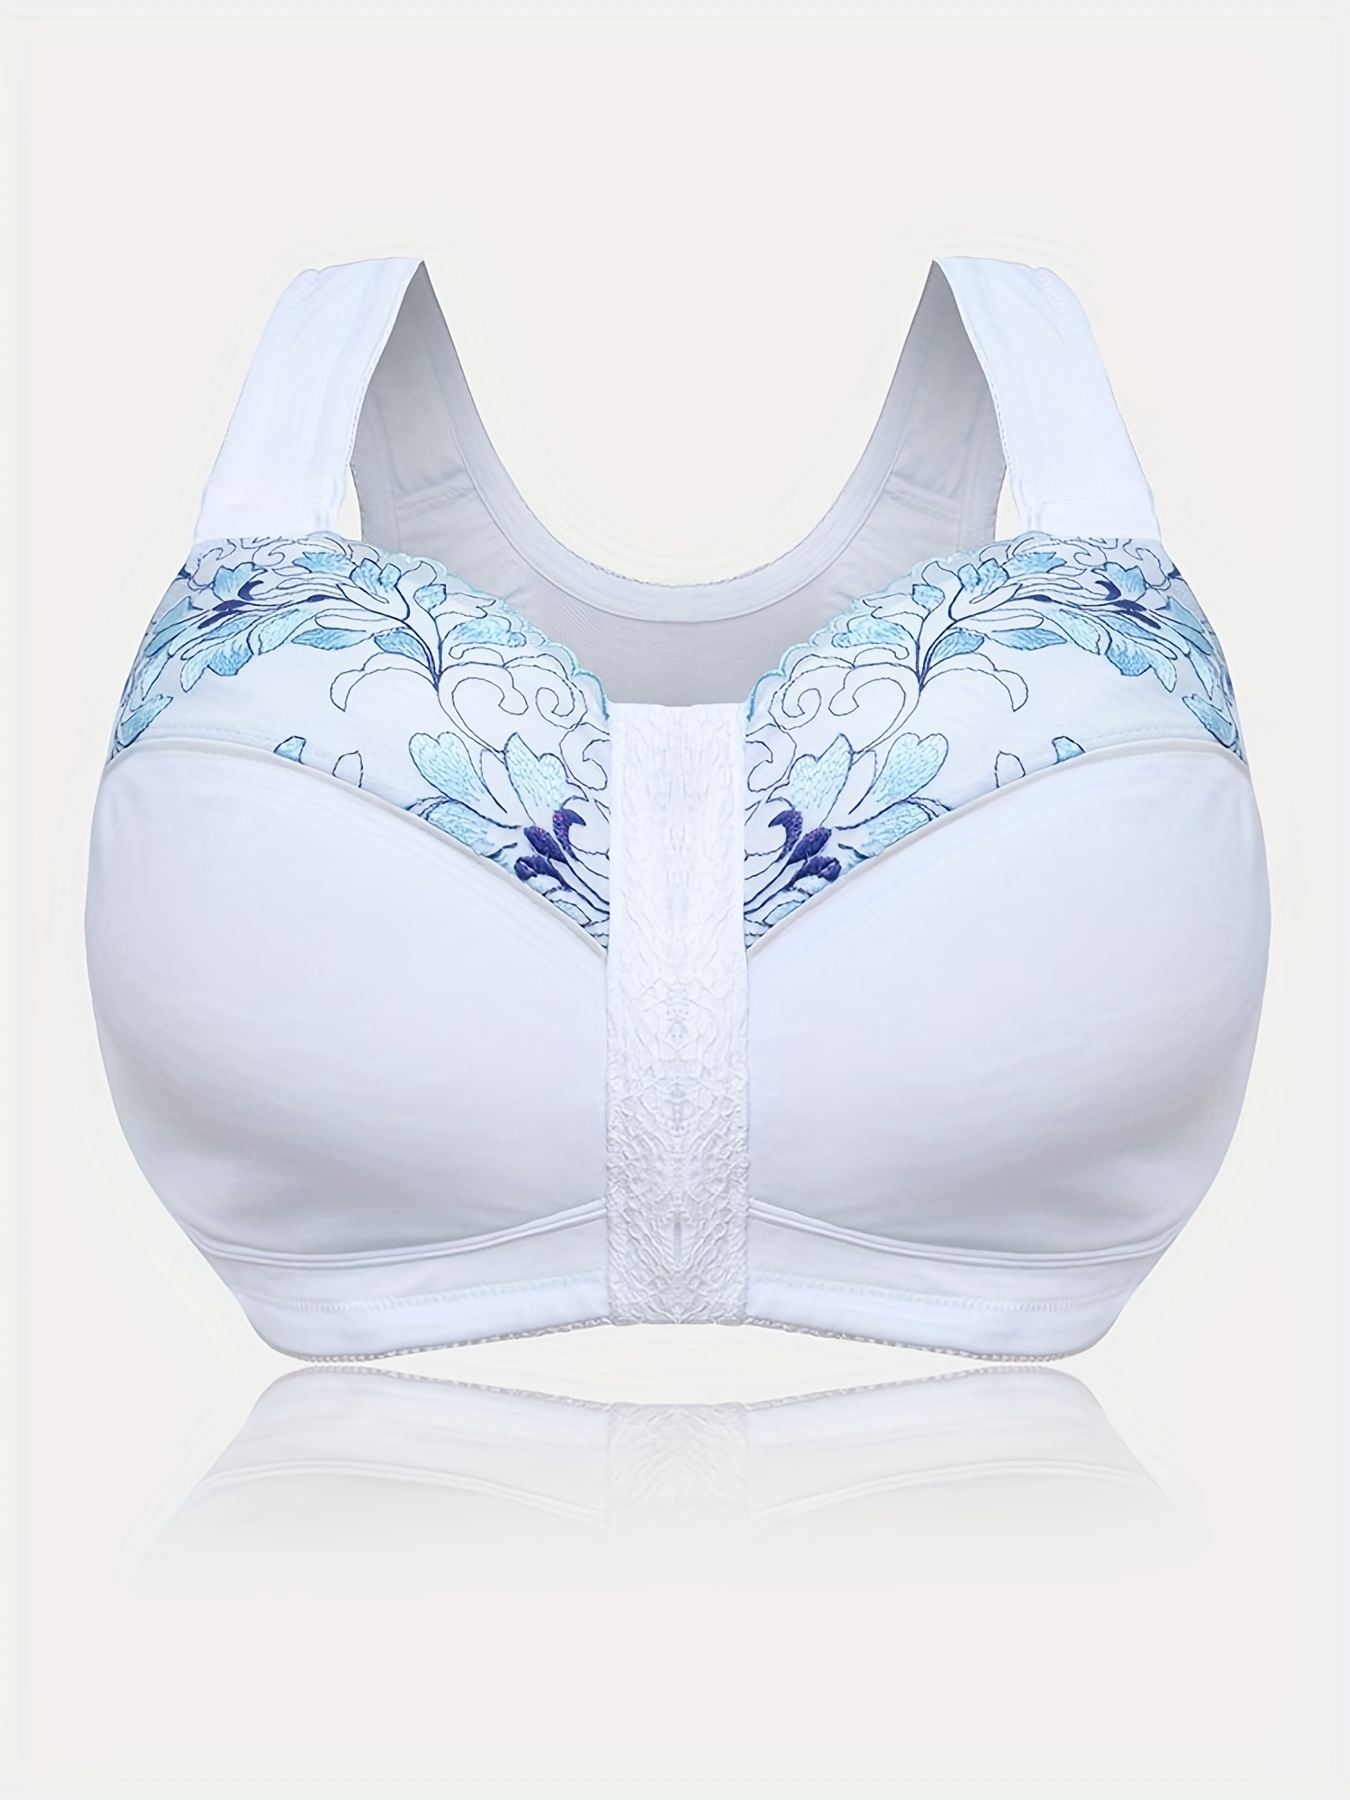 DORKASM Wireless Bras for Women Full Coverage Shapewear Padded Plus Size  Wireless Bras for Women Pack Plunge T-Shirt Bra 40A Complexion